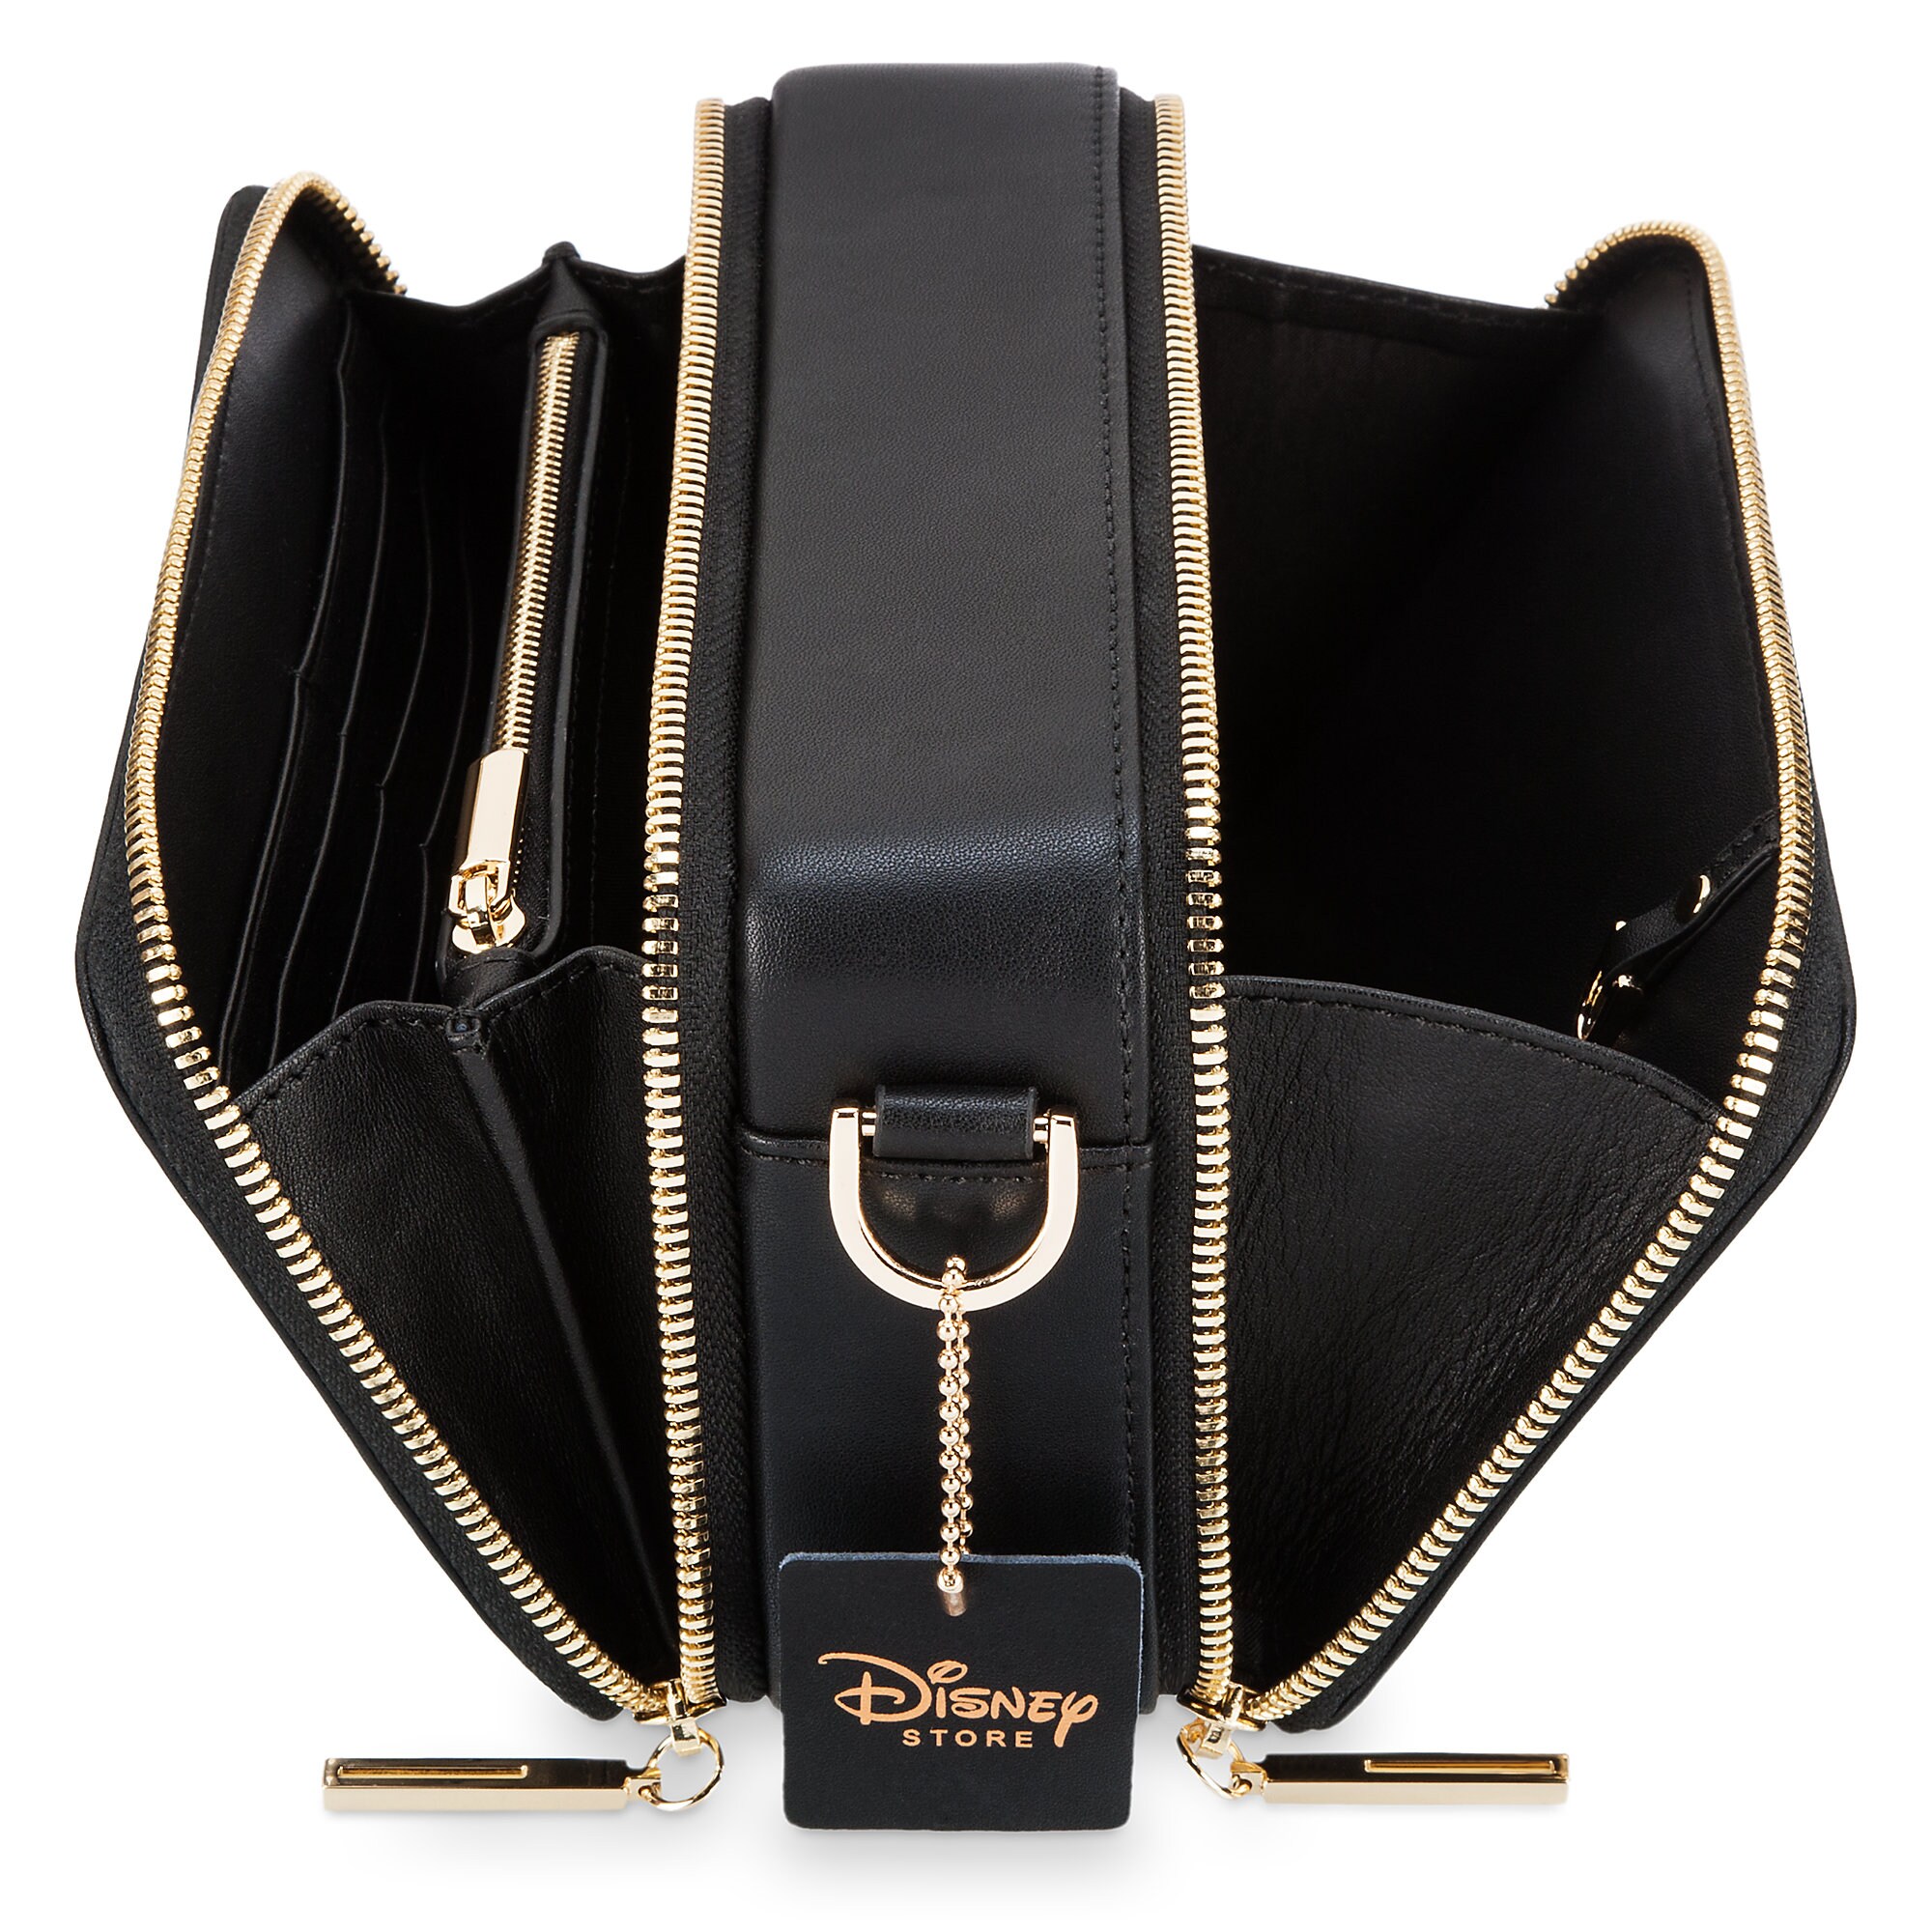 Mickey Mouse Black and Gold Shoulder Bag